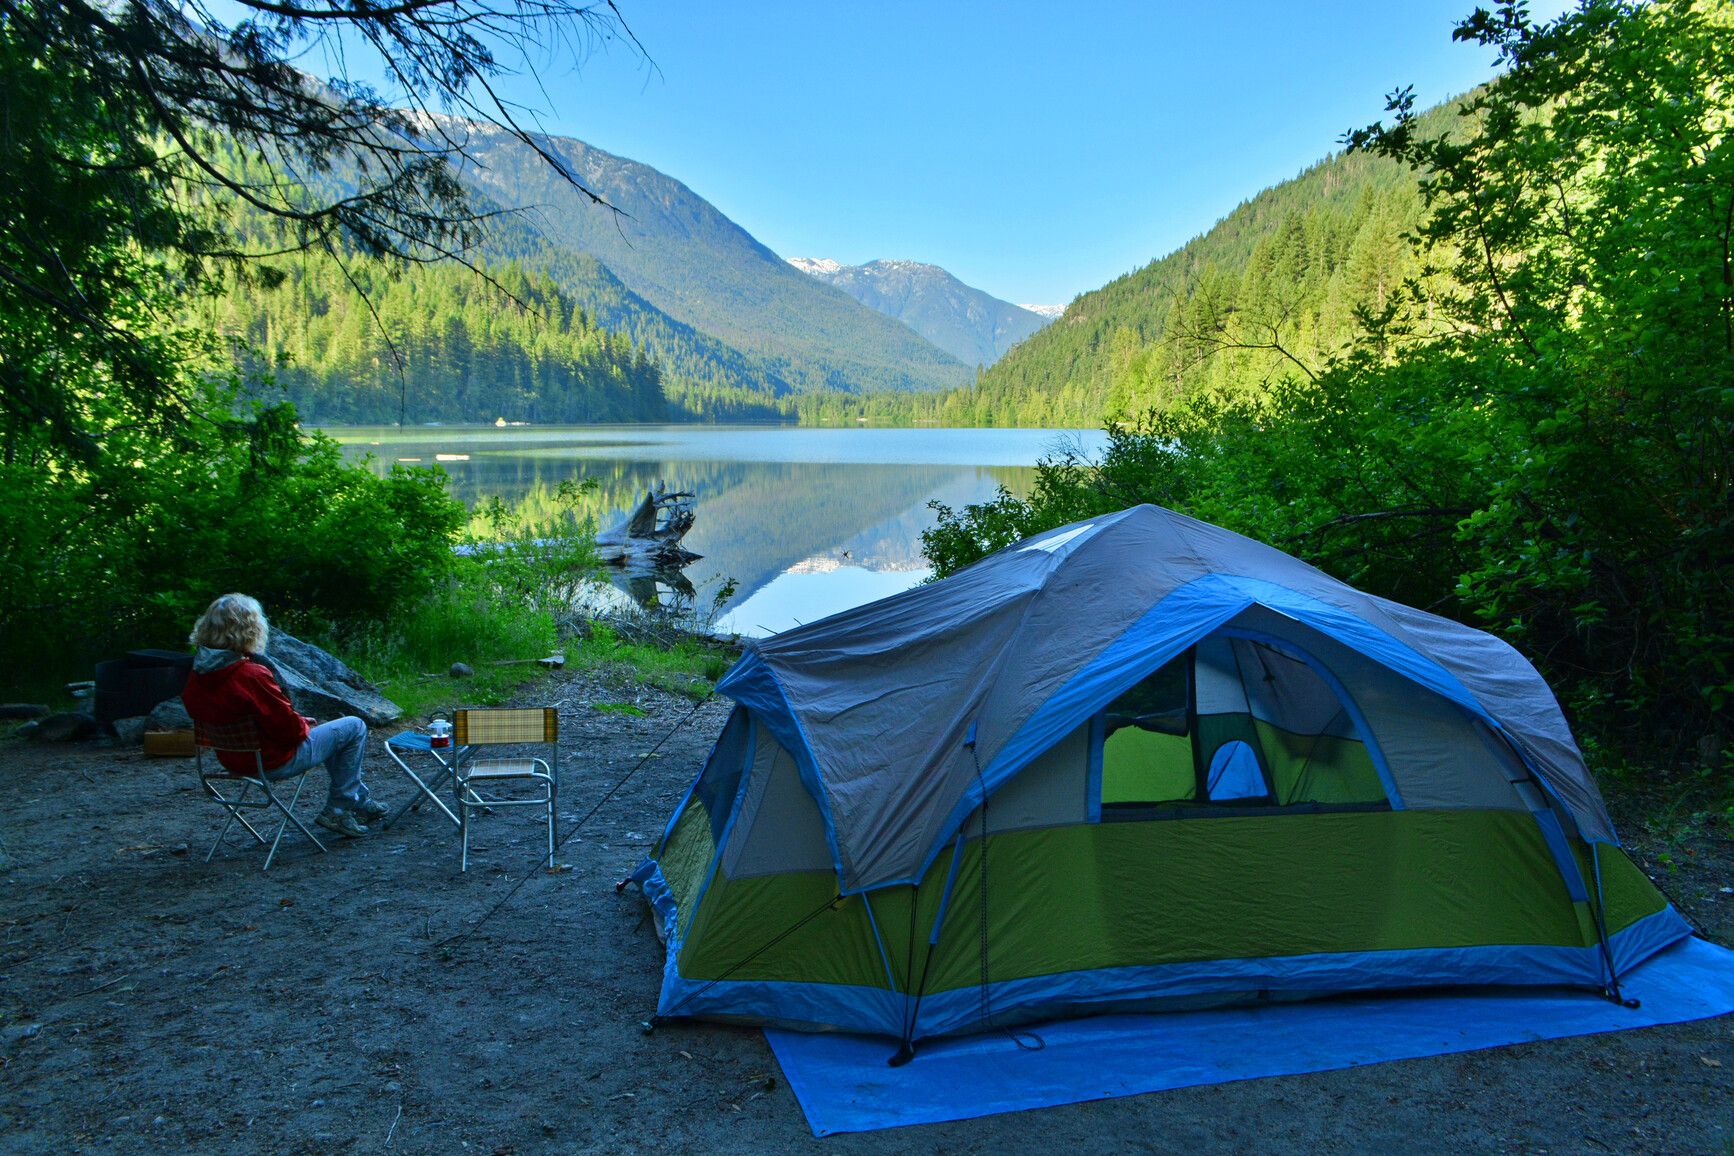 Camping by the lake in Nahatlatch Park.